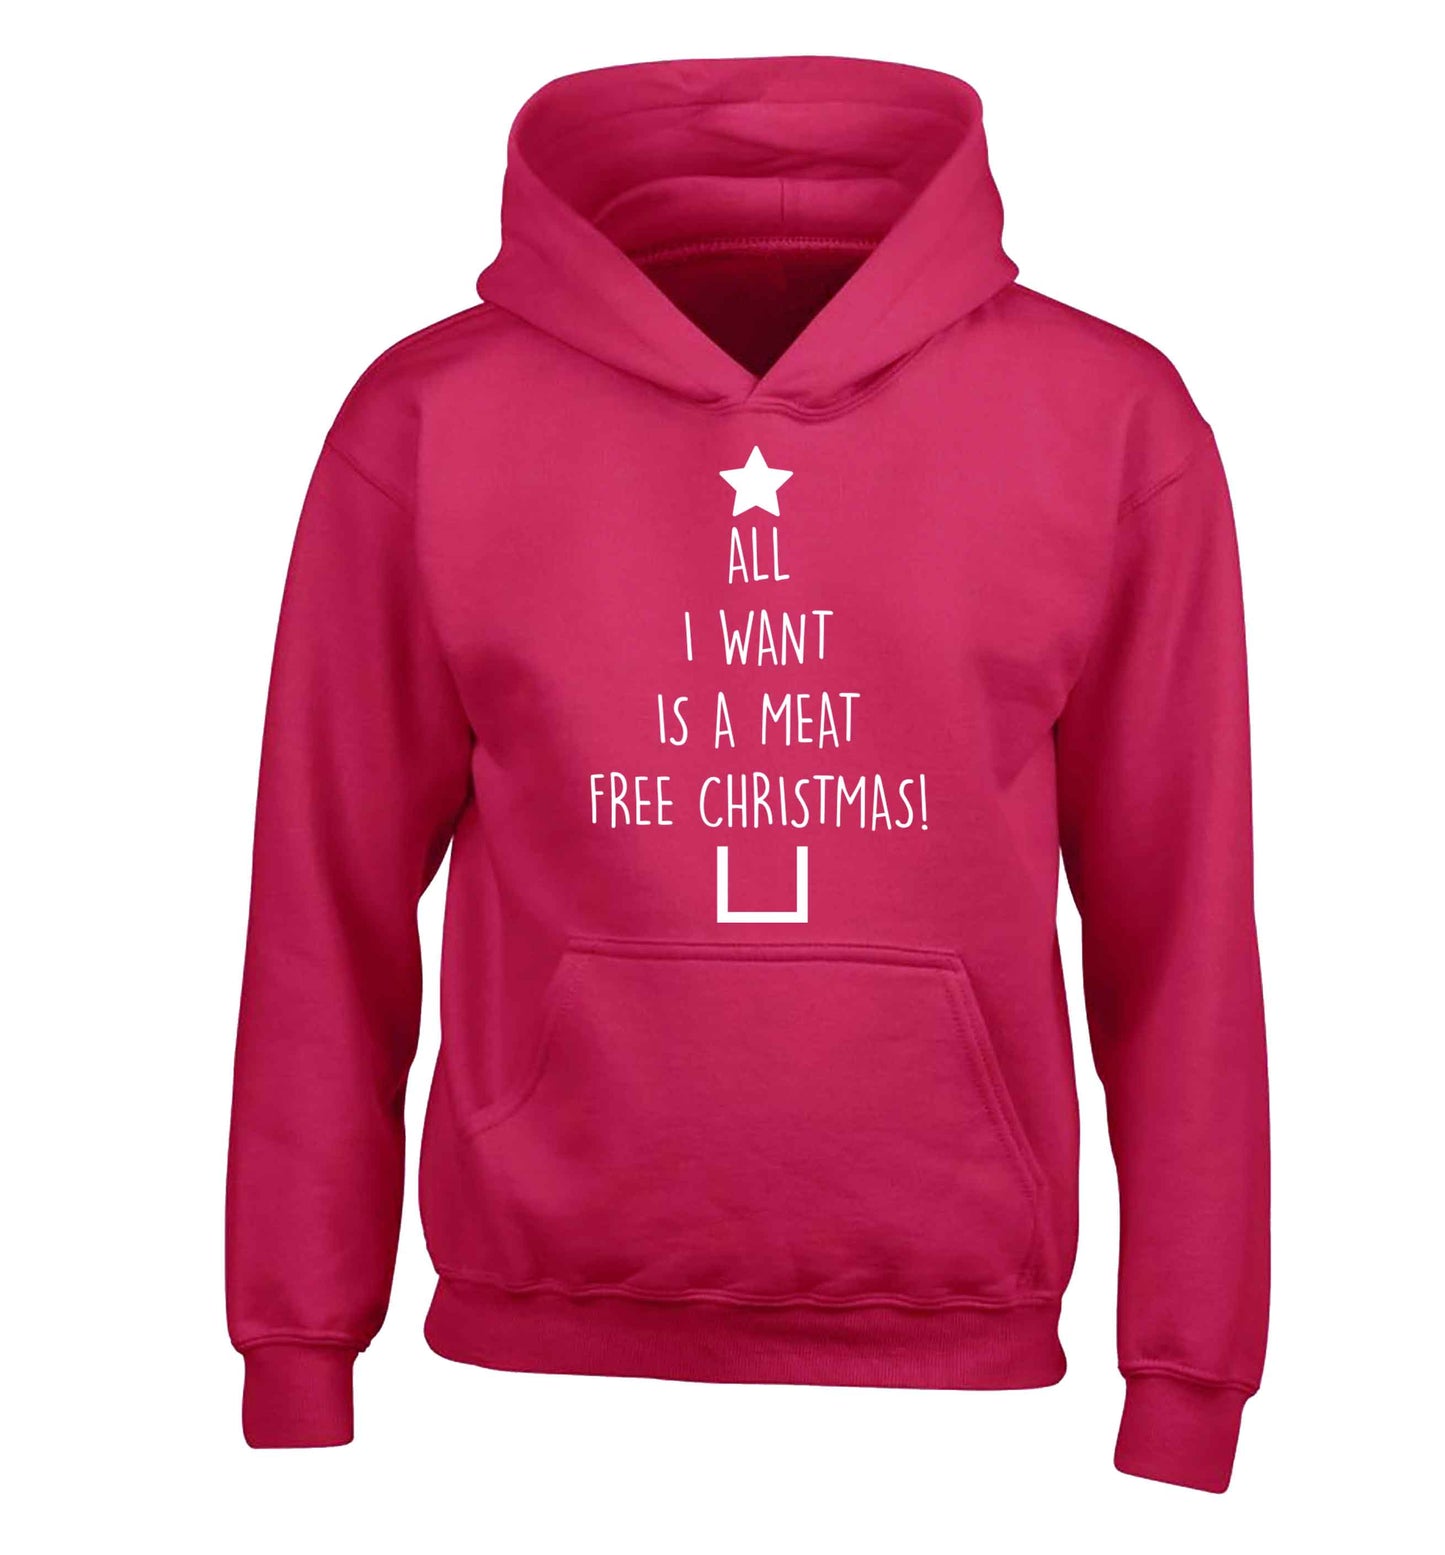 All I want is a meat free Christmas children's pink hoodie 12-13 Years